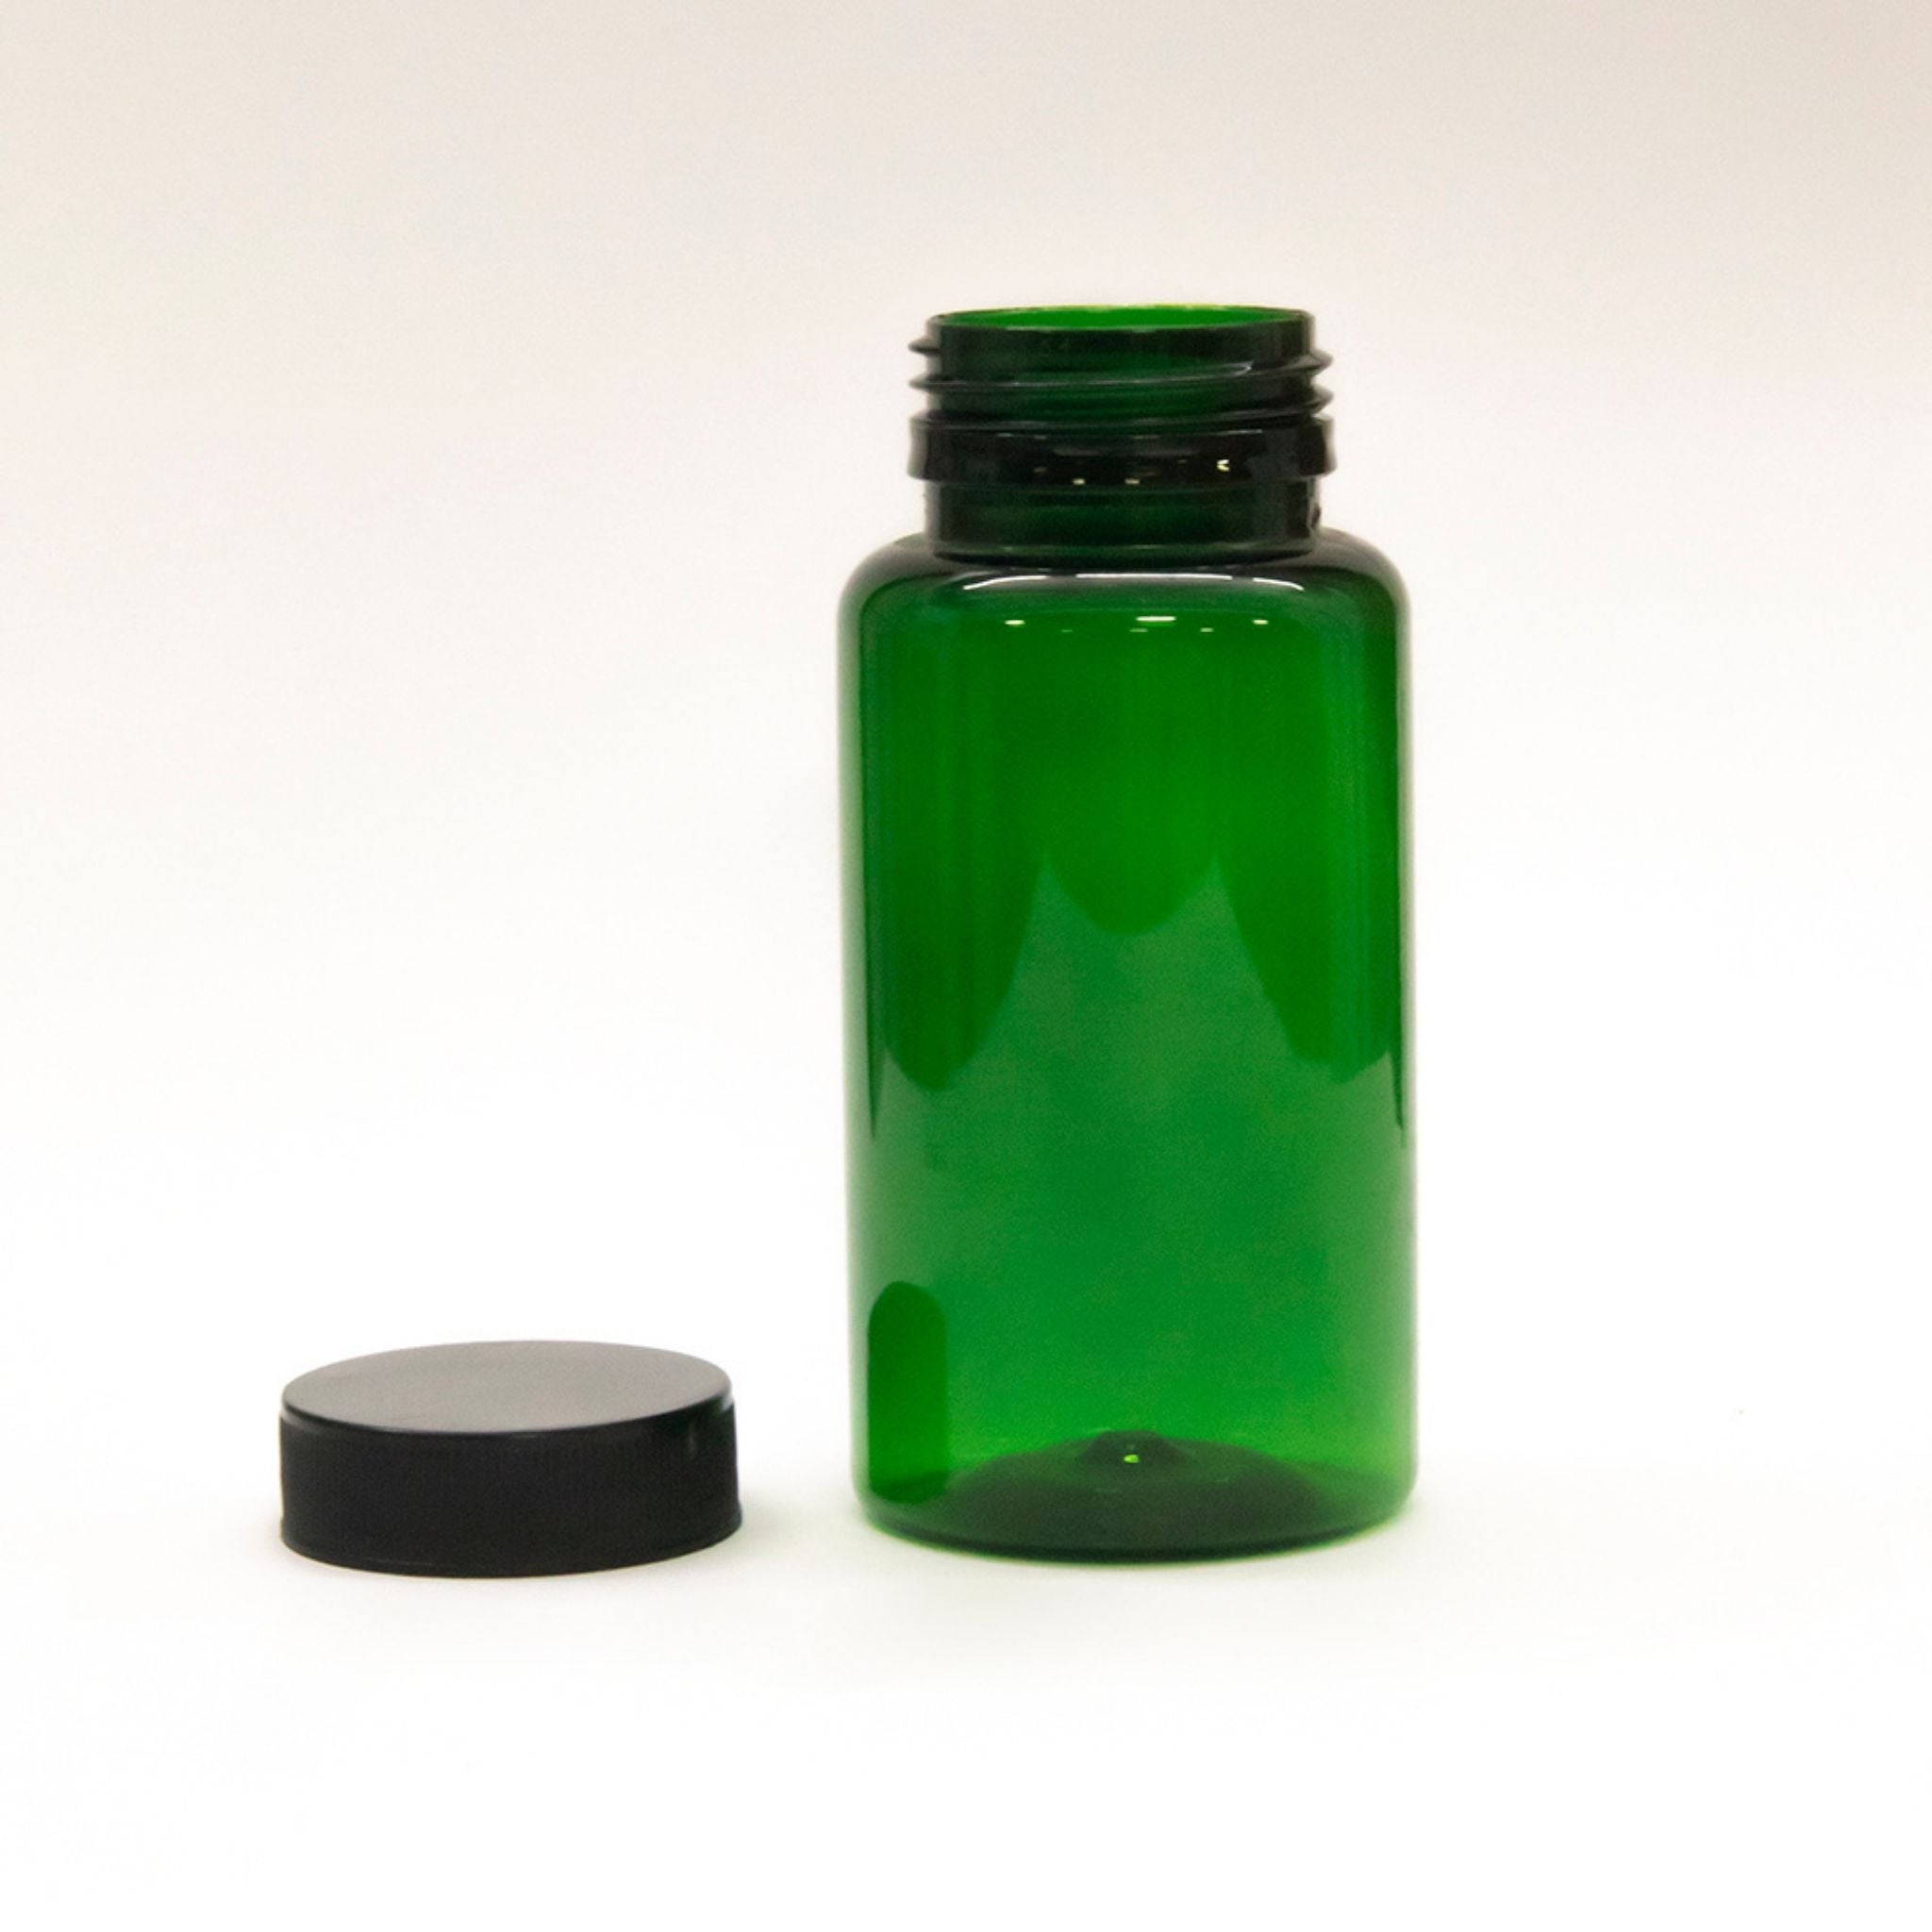 100ml PET Empty Green Bottle for Secure Storage., Patco Pharma, Plastic Containers, 100ml-pet-empty-green-bottle-for-ayurvedic-powder-storage-capsules-tablets-store-bottle-air-tight-container, 100ml empty bottle, medicine bottle, Plastic Containers, Patco Pharma